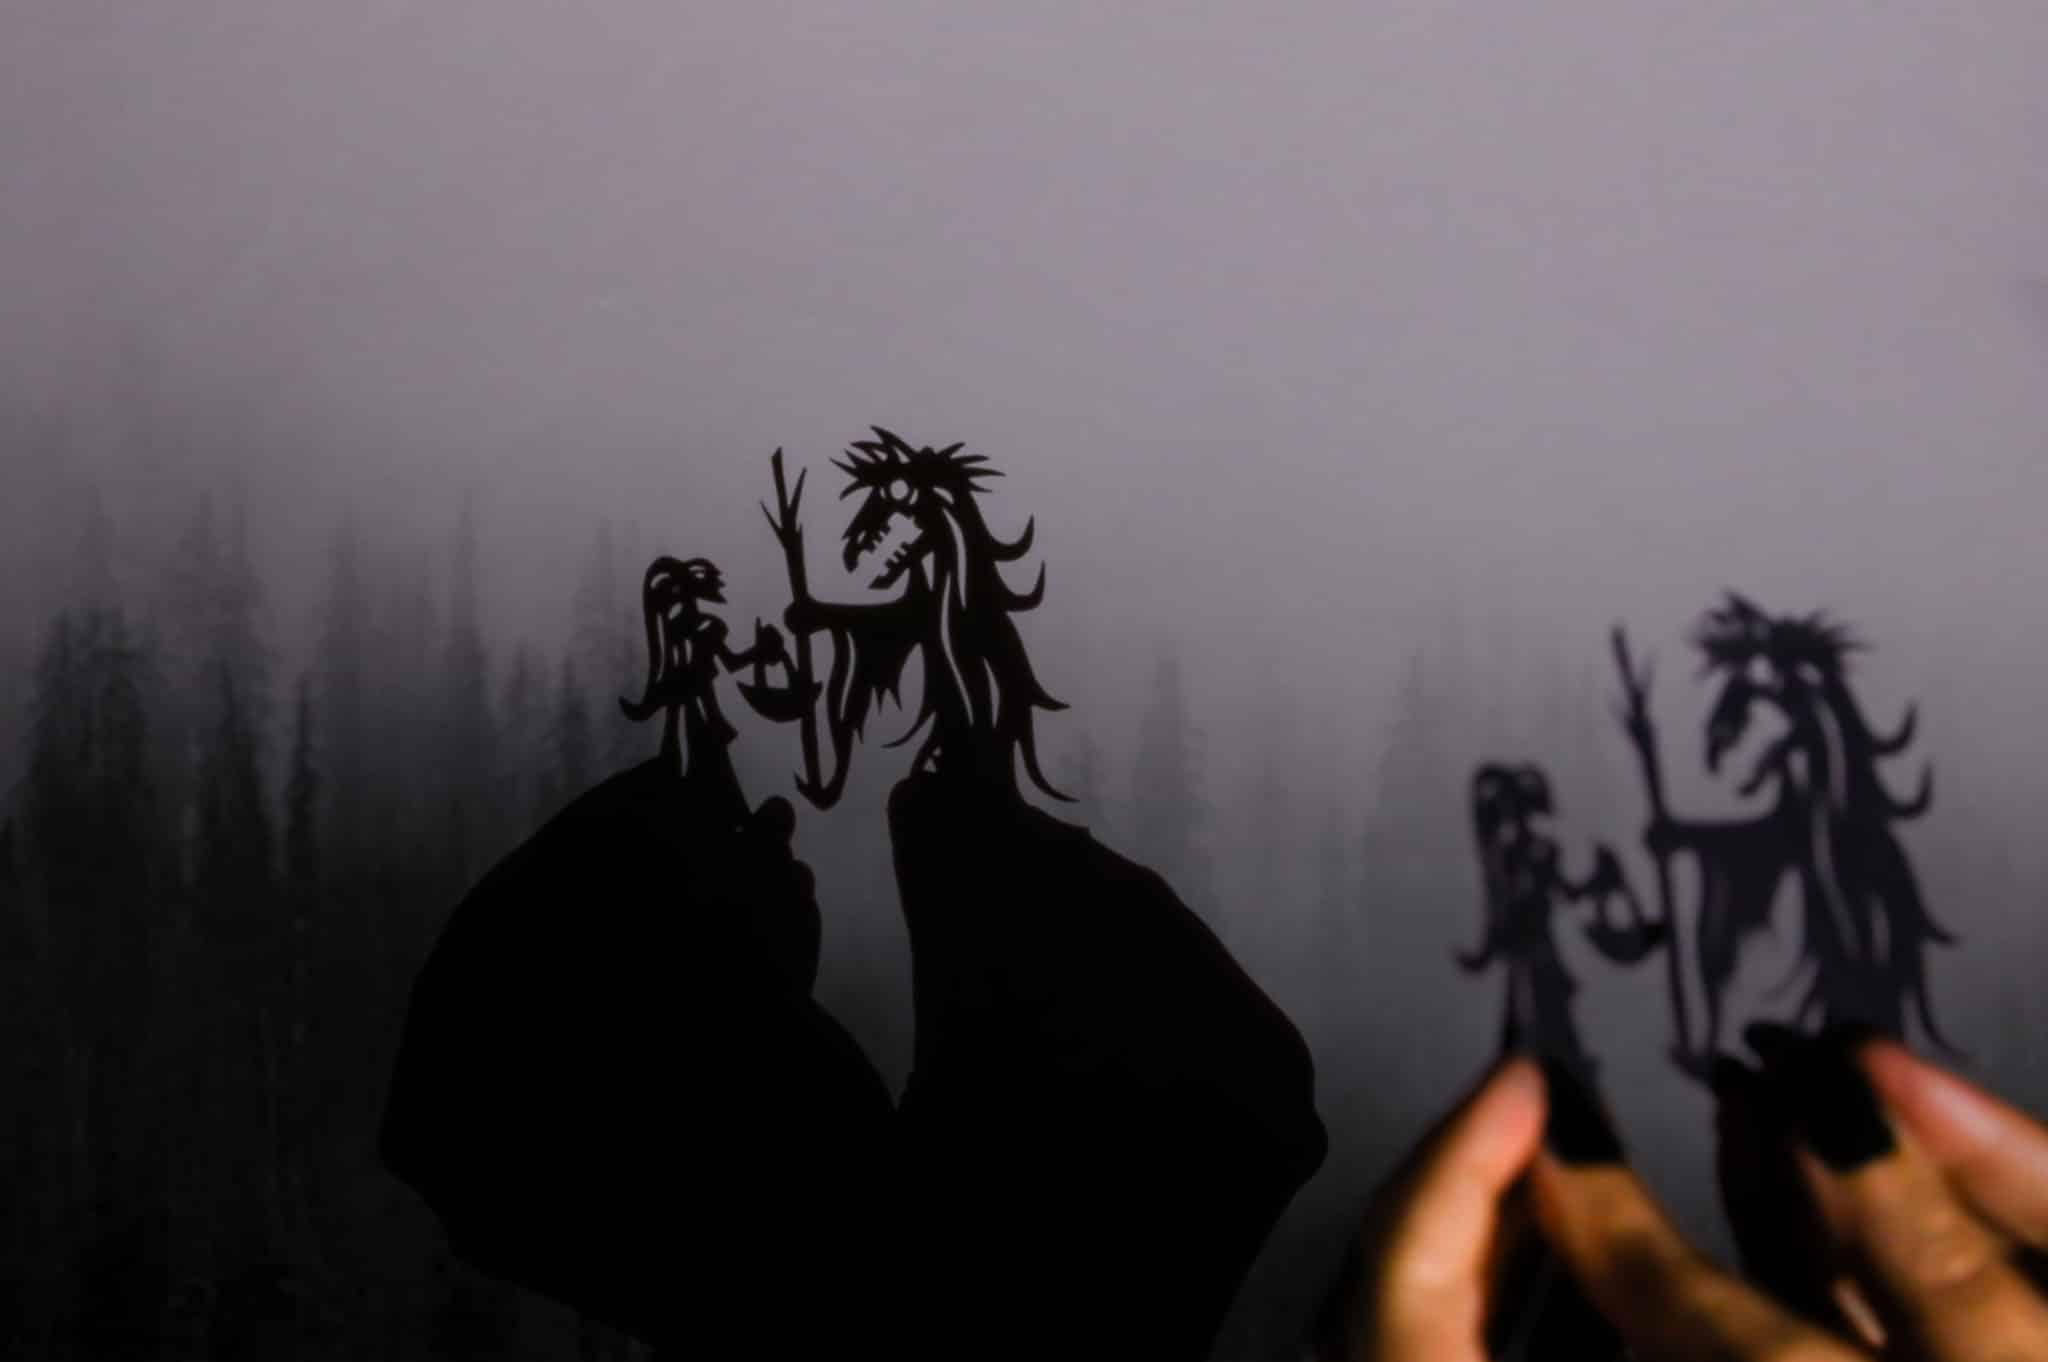 The artist creating a scene with shadow puppets